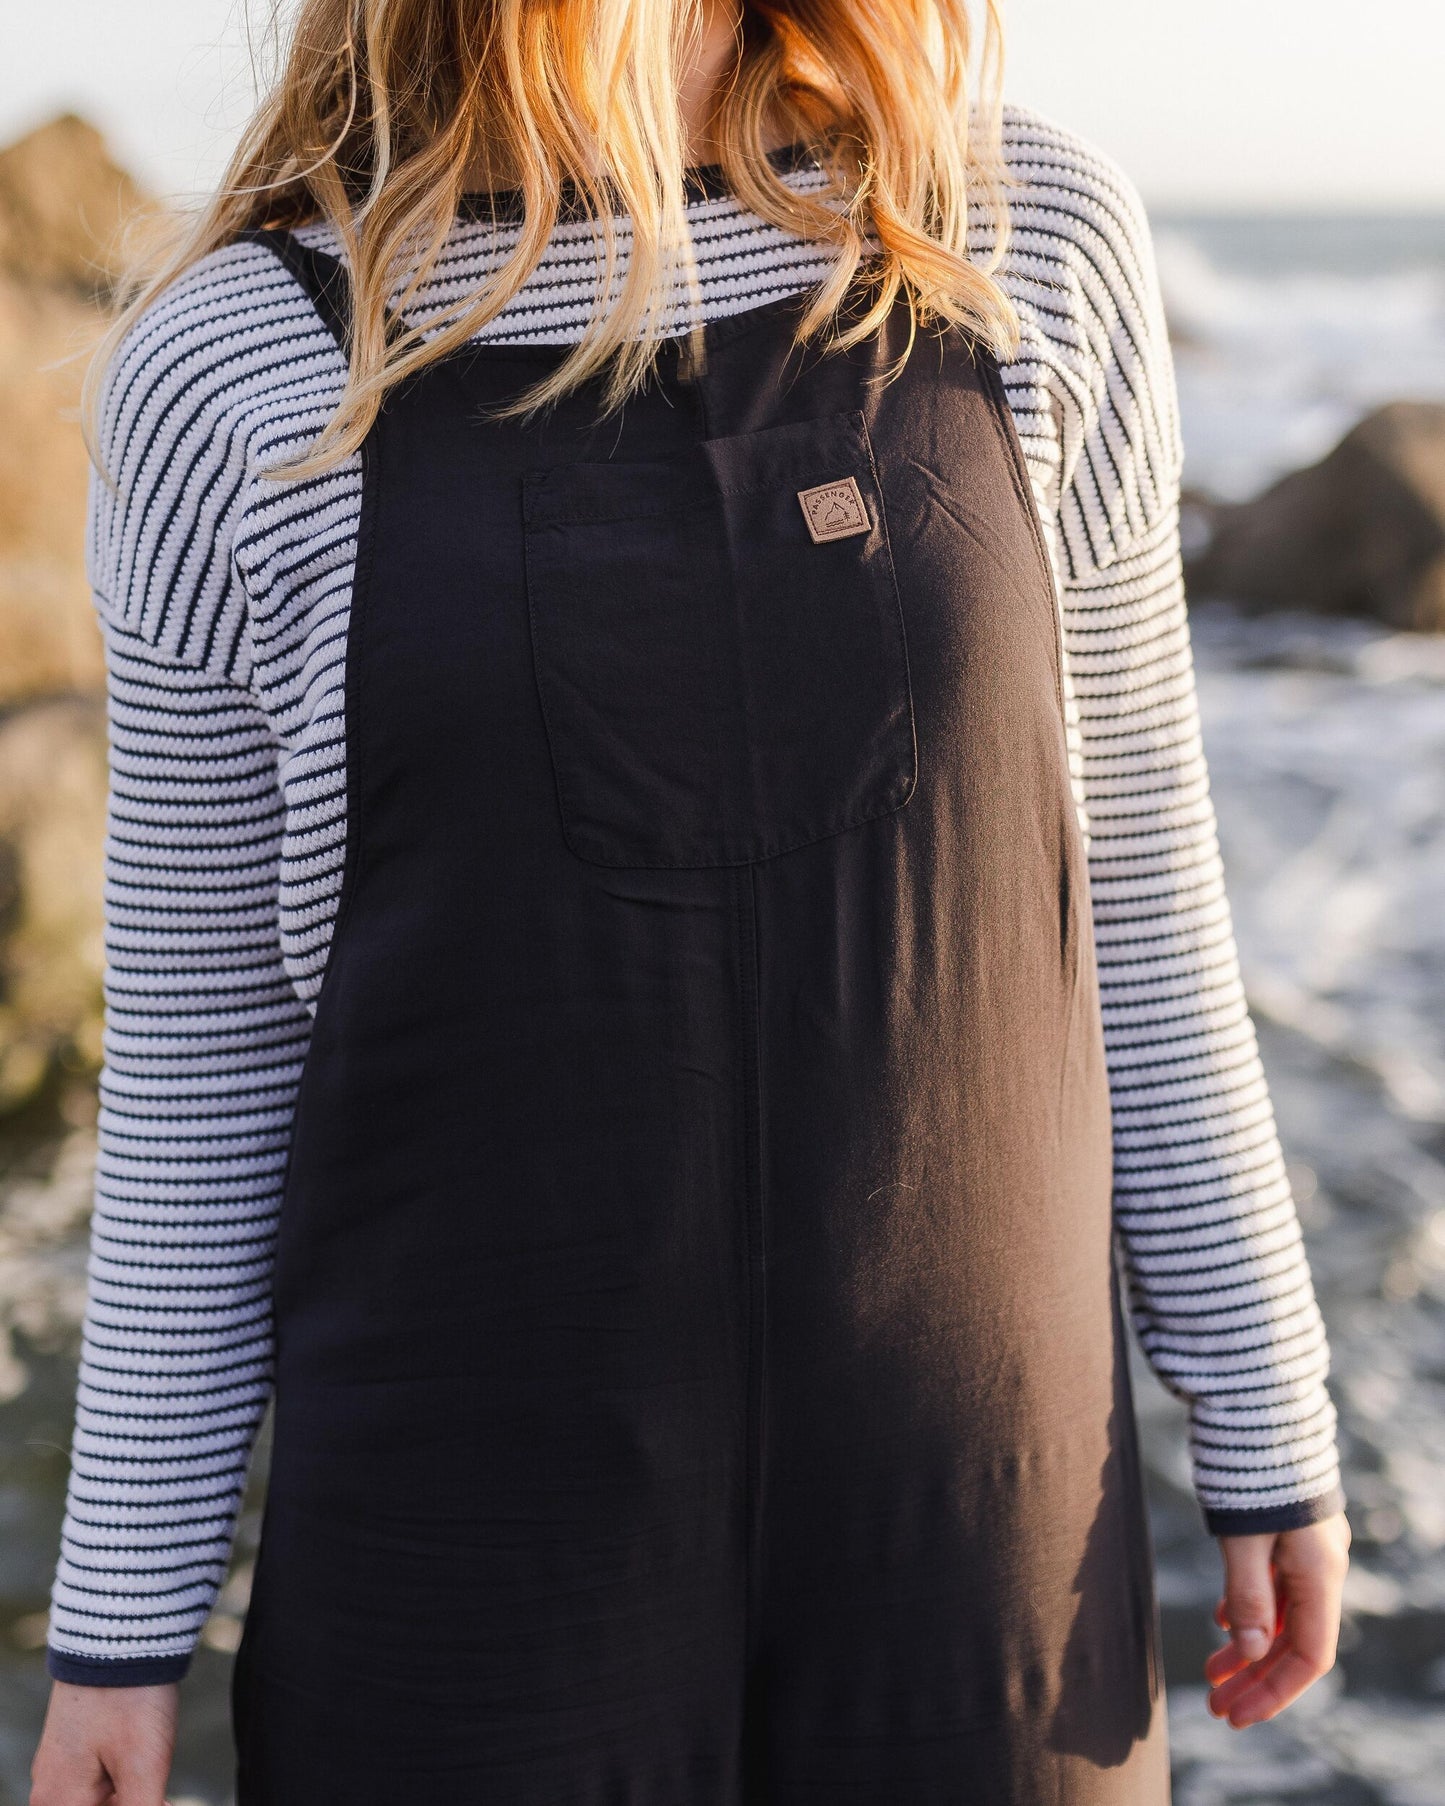 Lazy Day Dungarees - Faded Black